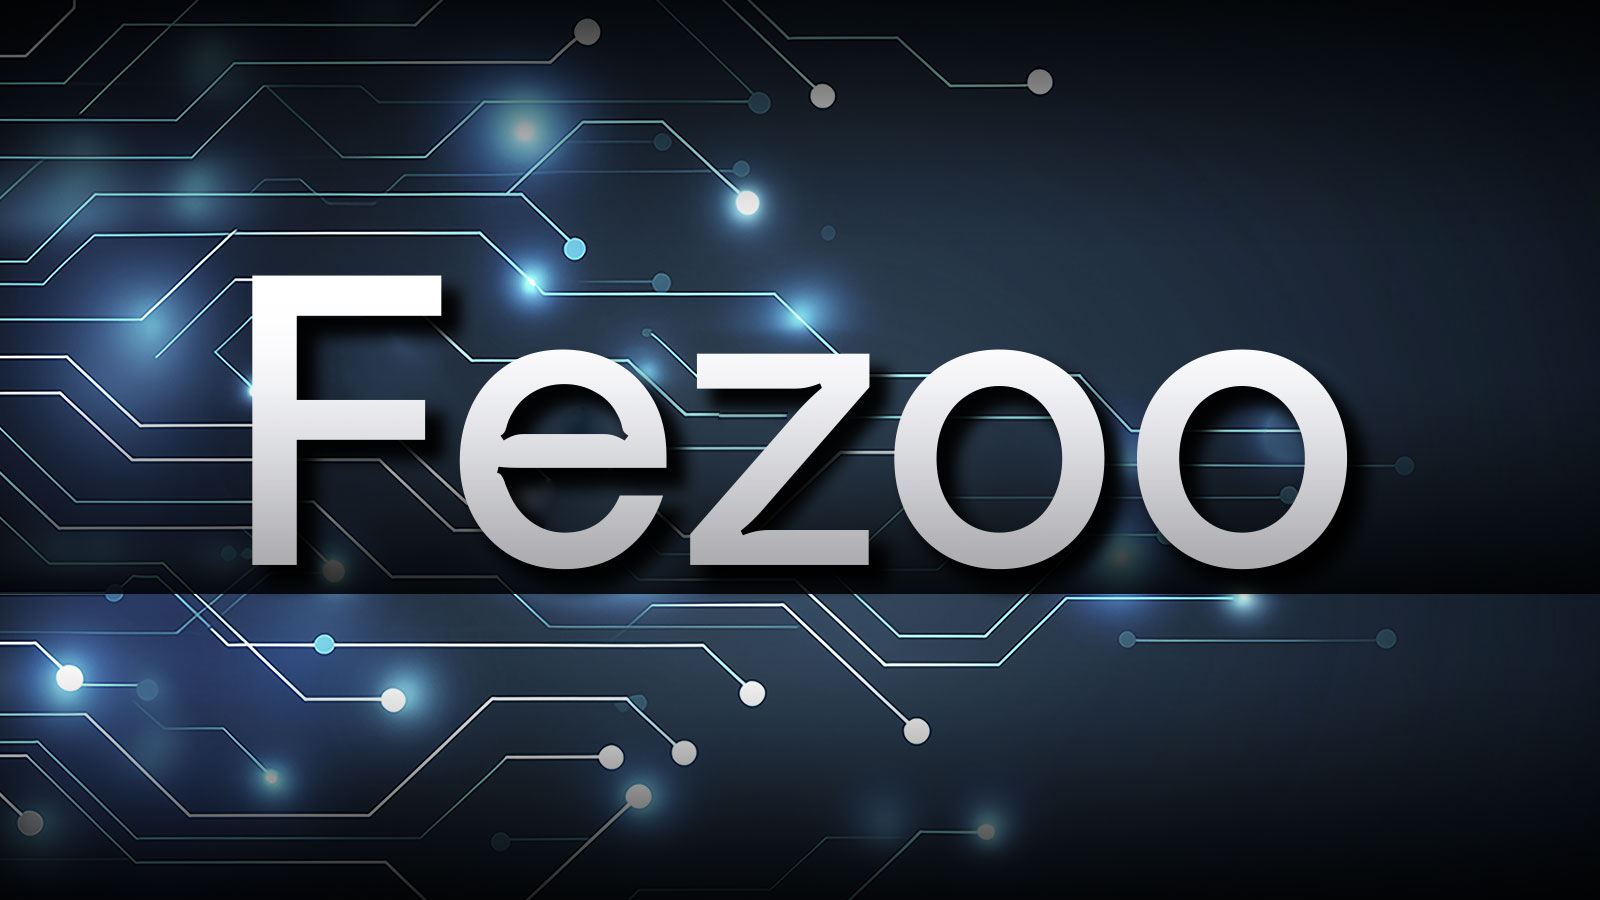 Fezoo (FEZ) Asset Pre-Sale Might be Gaining Steam This Month as Unus Sed Leo (LEO) and Aptos (APT) Altcoins Recovering